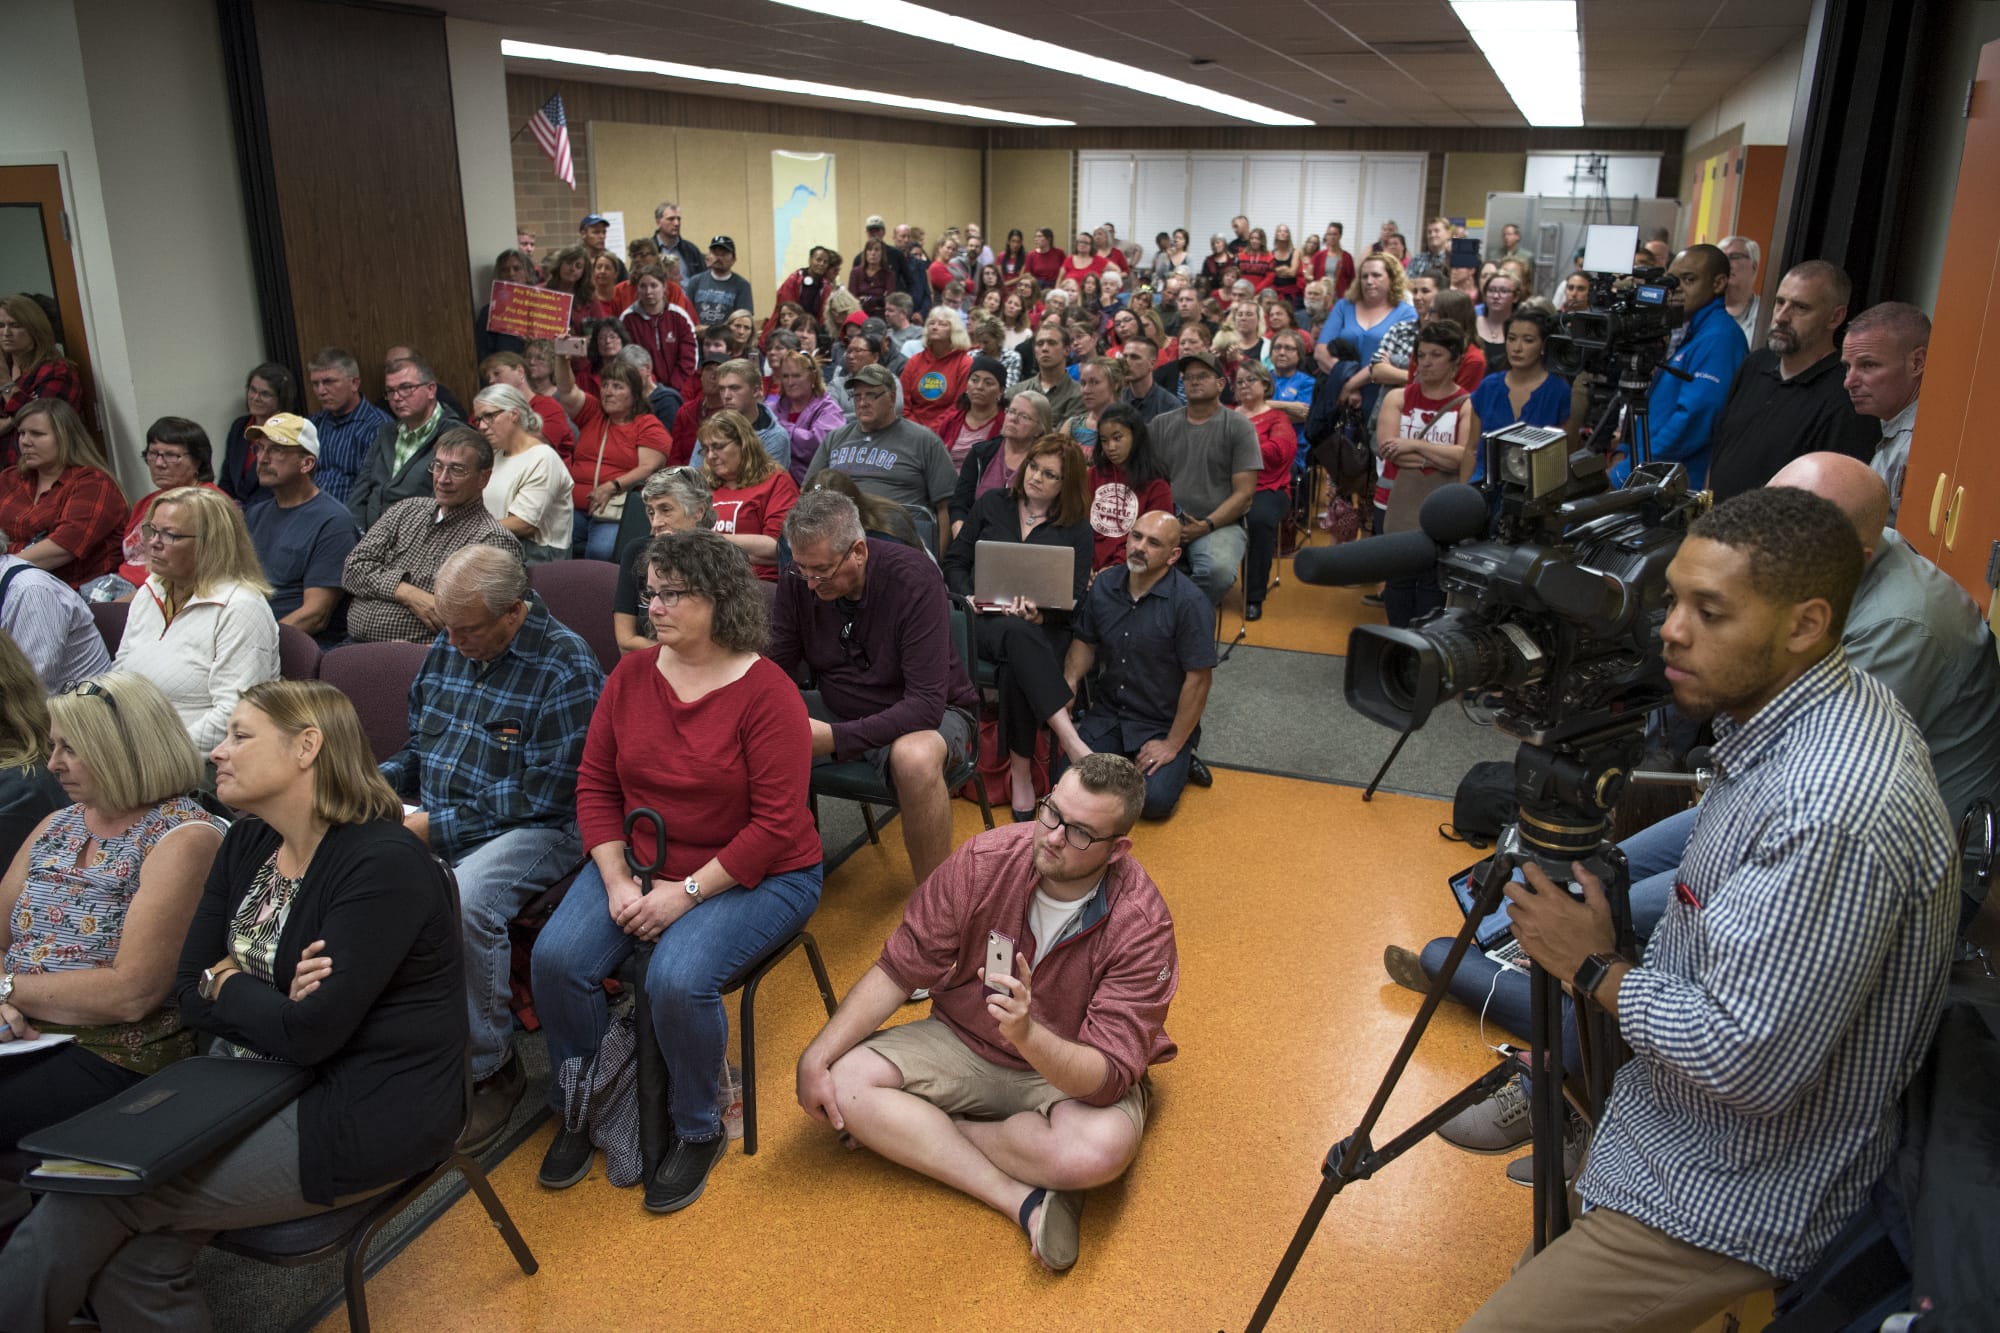 The room is filled to capacity with at least 260 people during a Battle Ground Public Schools board meeting on Monday, Sept. 10, 2018, at the Lewisville Intermediate Campus in Battle Ground.